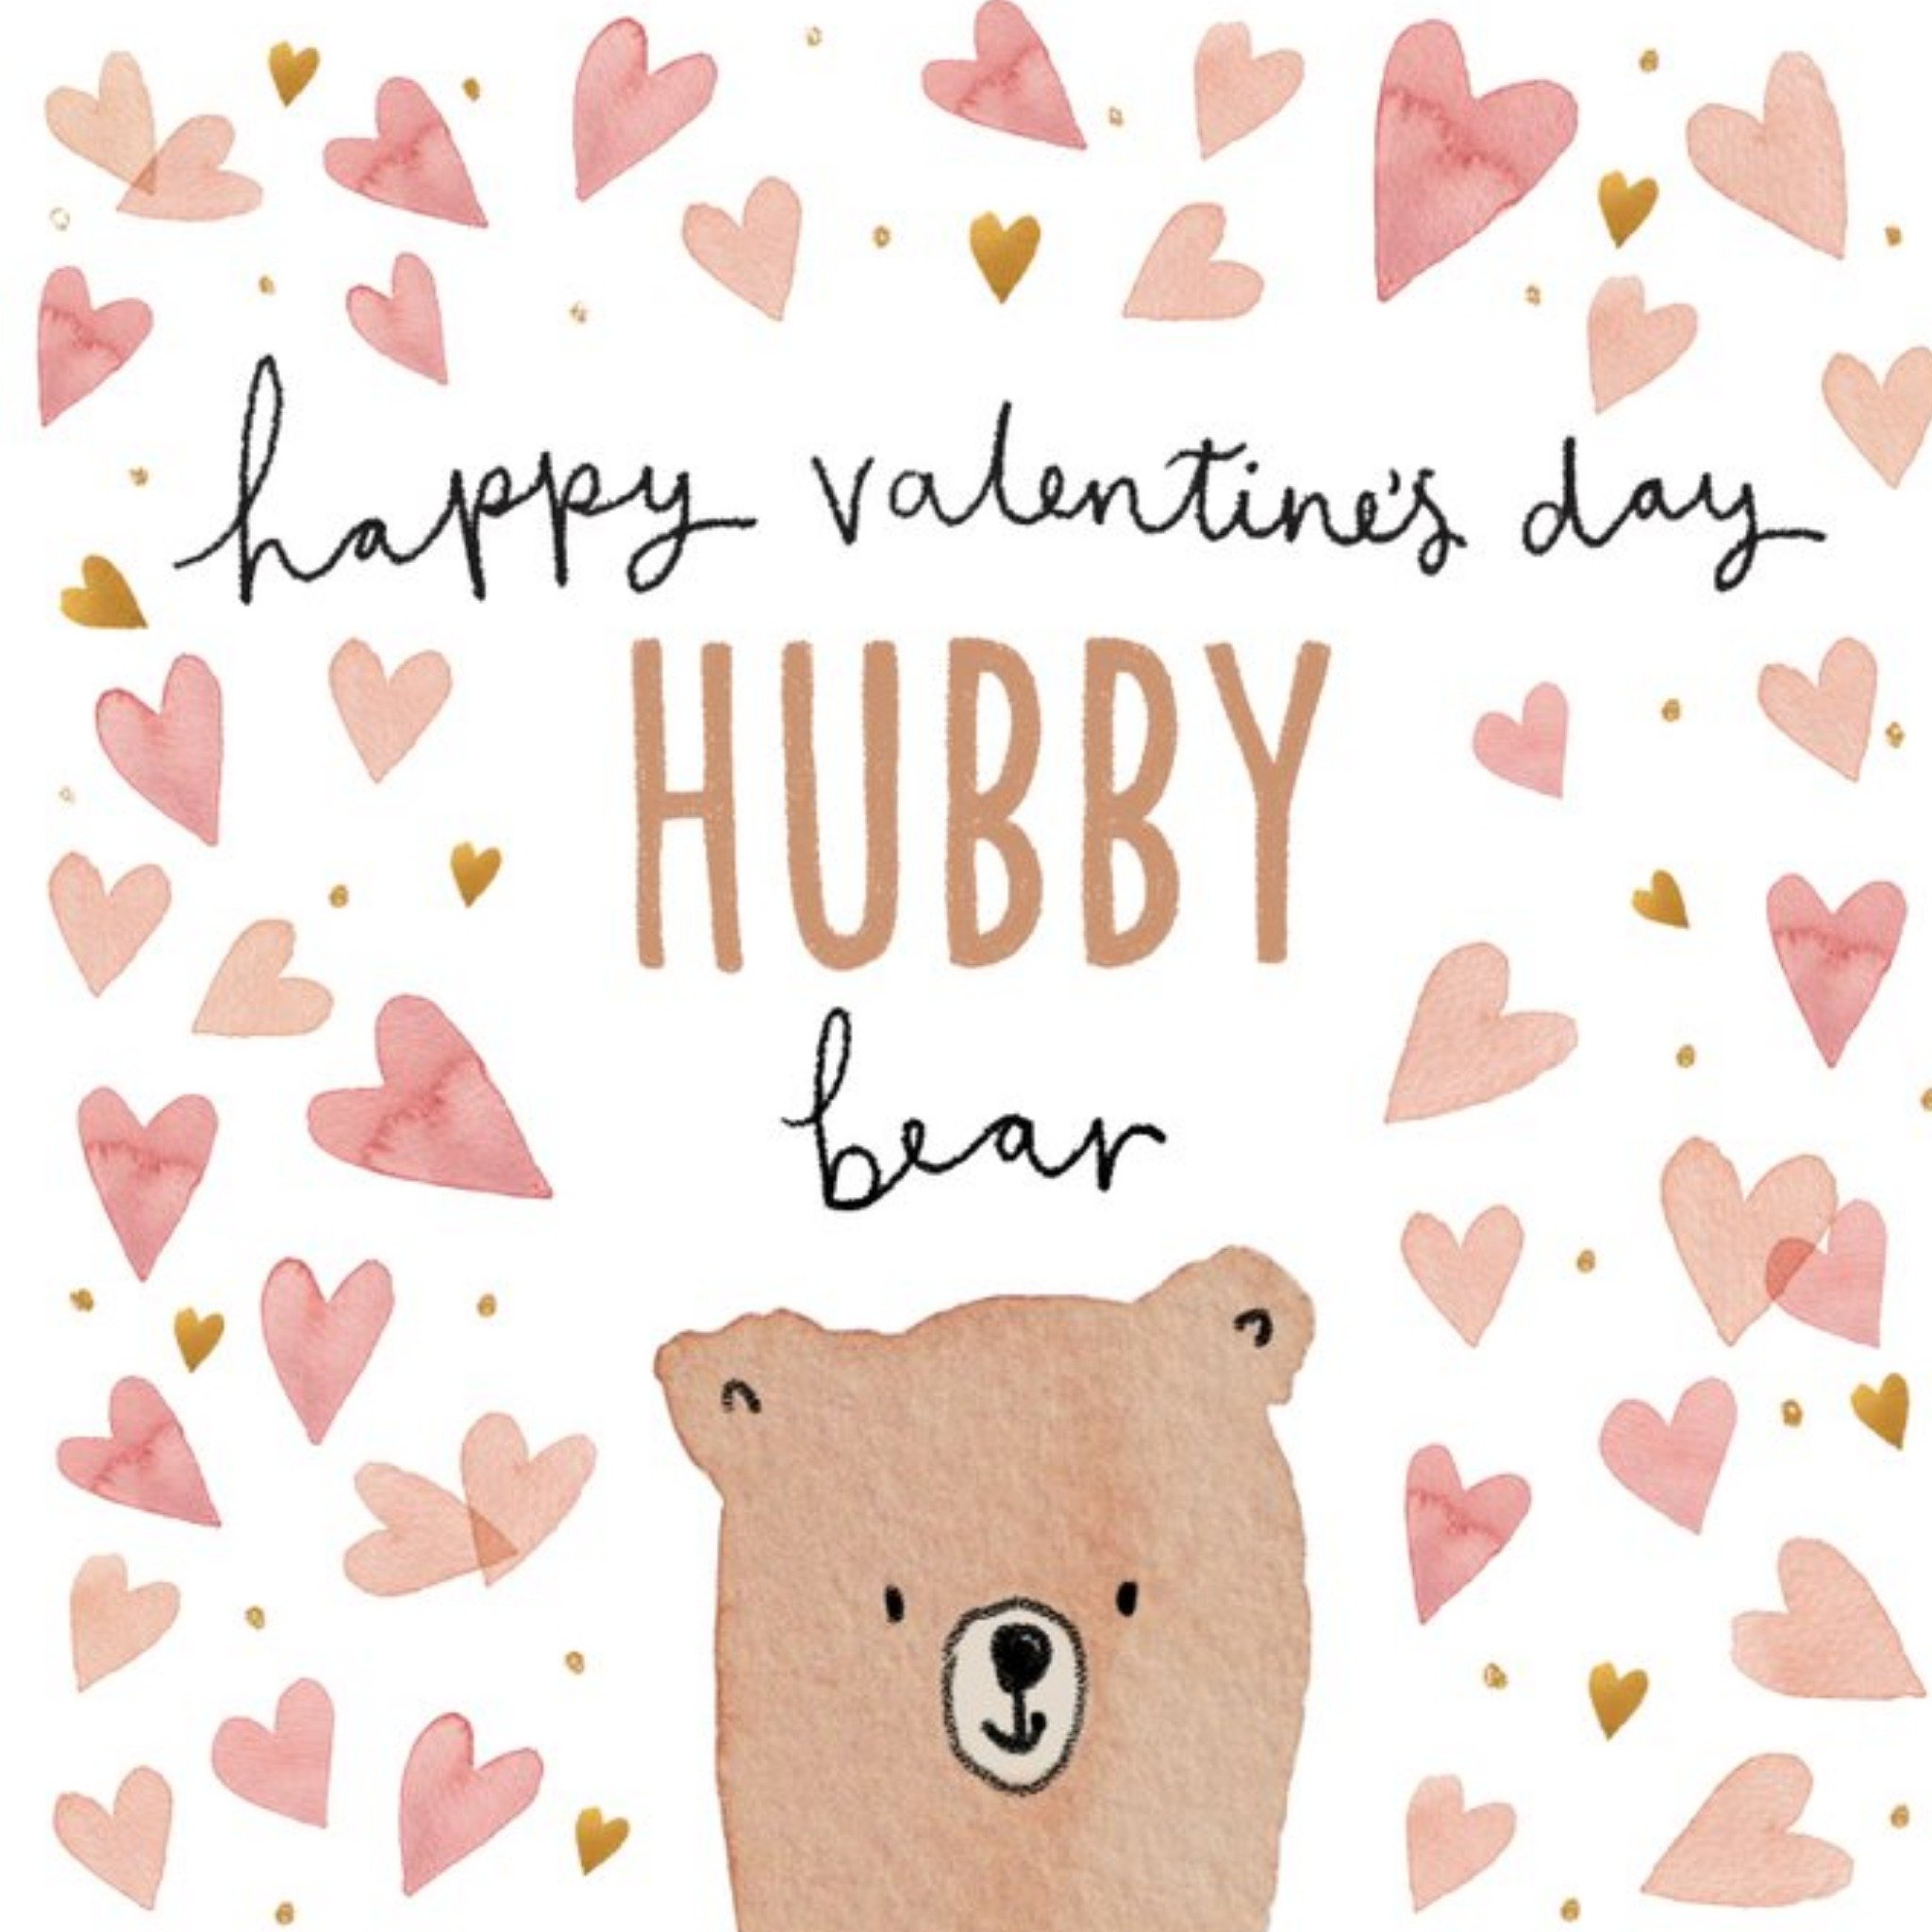 Moonpig Cute Illustrated Hubby Bear Valentine's Day Card, Square